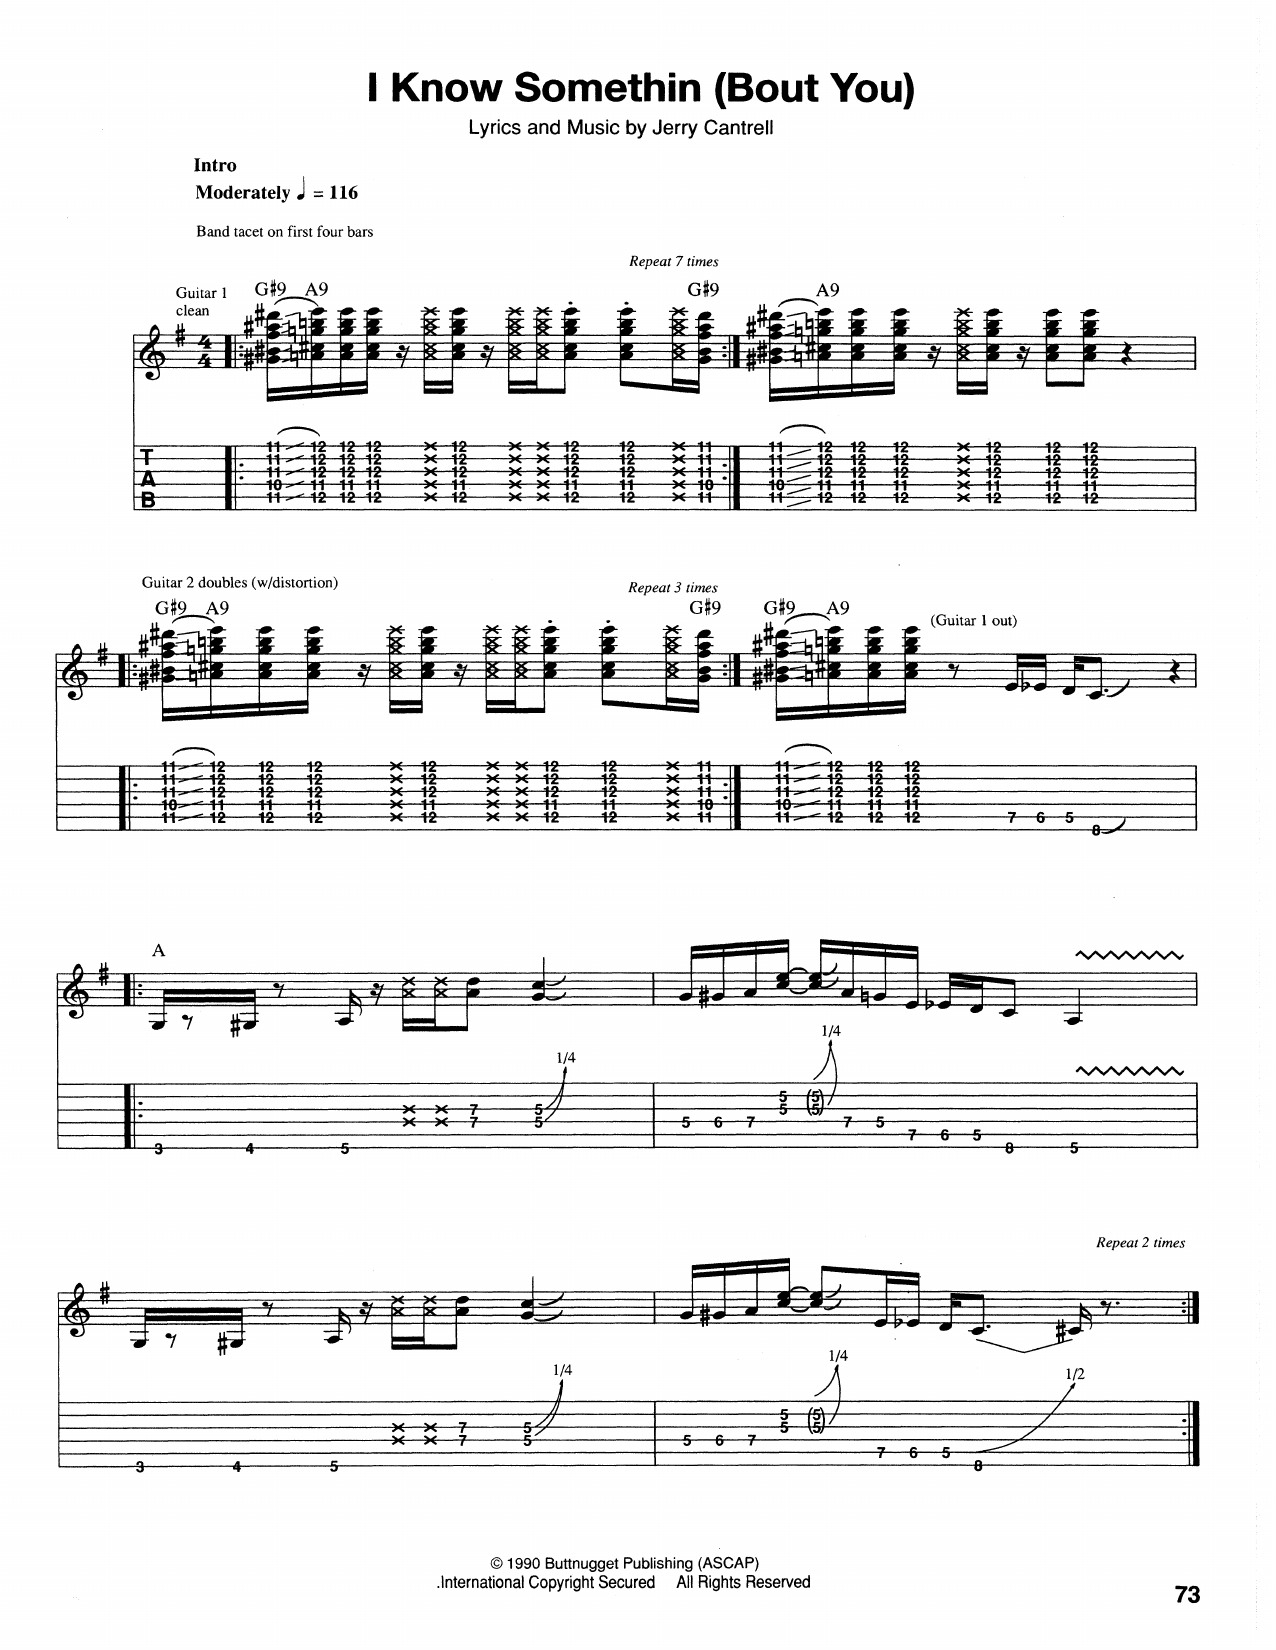 Download Alice In Chains I Know Somethin' (Bout You) Sheet Music